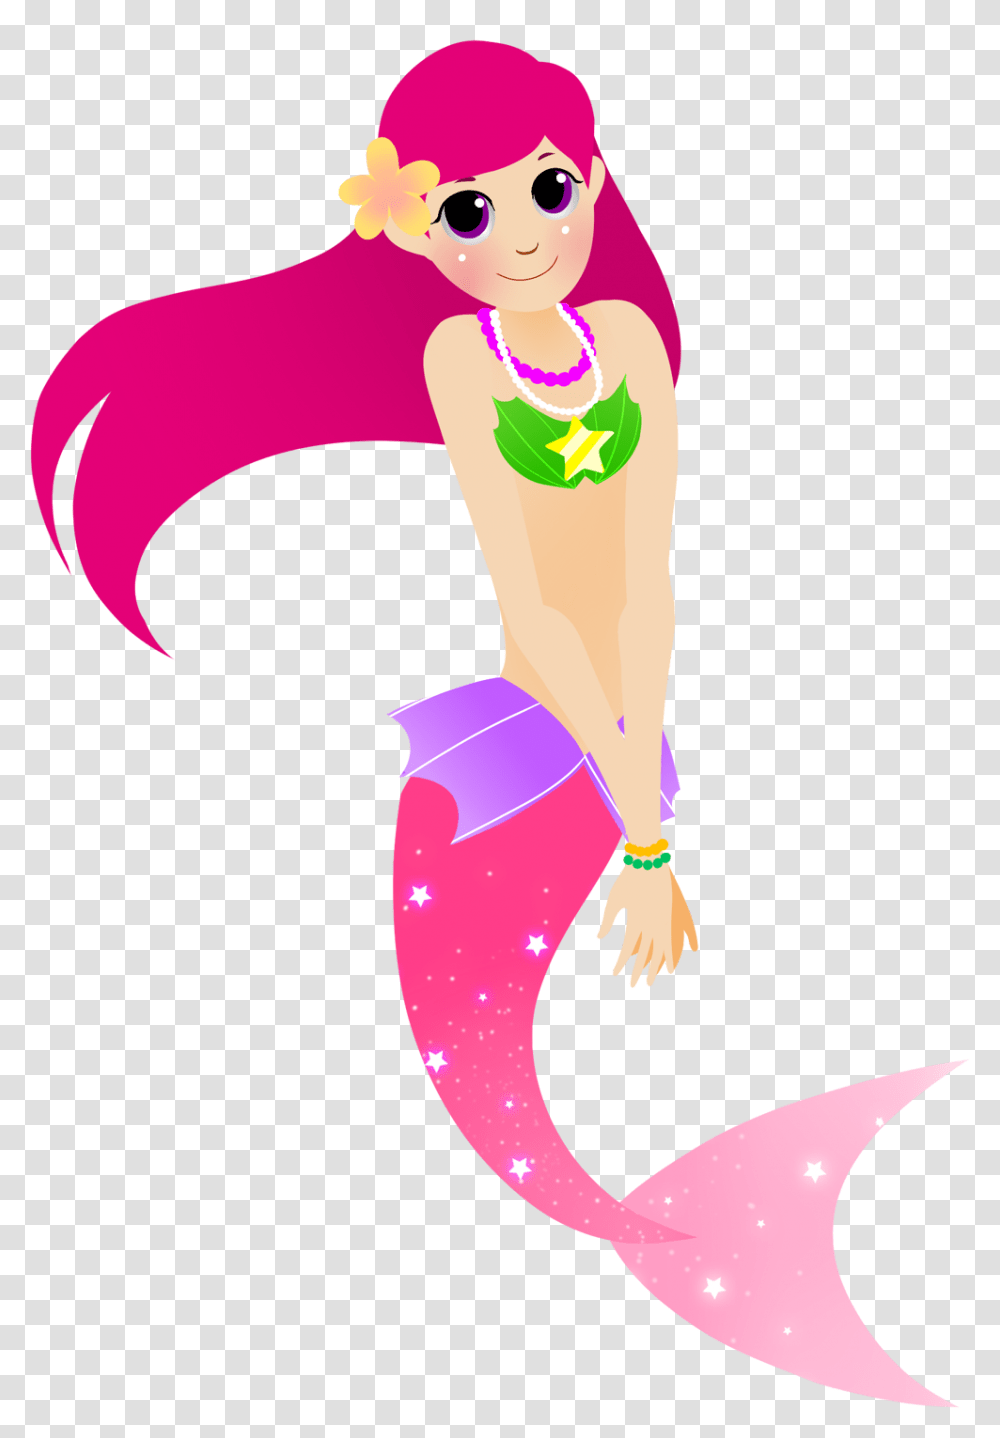 This Cute And Lovely Cartoon Mermaid Clip Art Is Free For Personal, Floral Design, Pattern, Poster Transparent Png